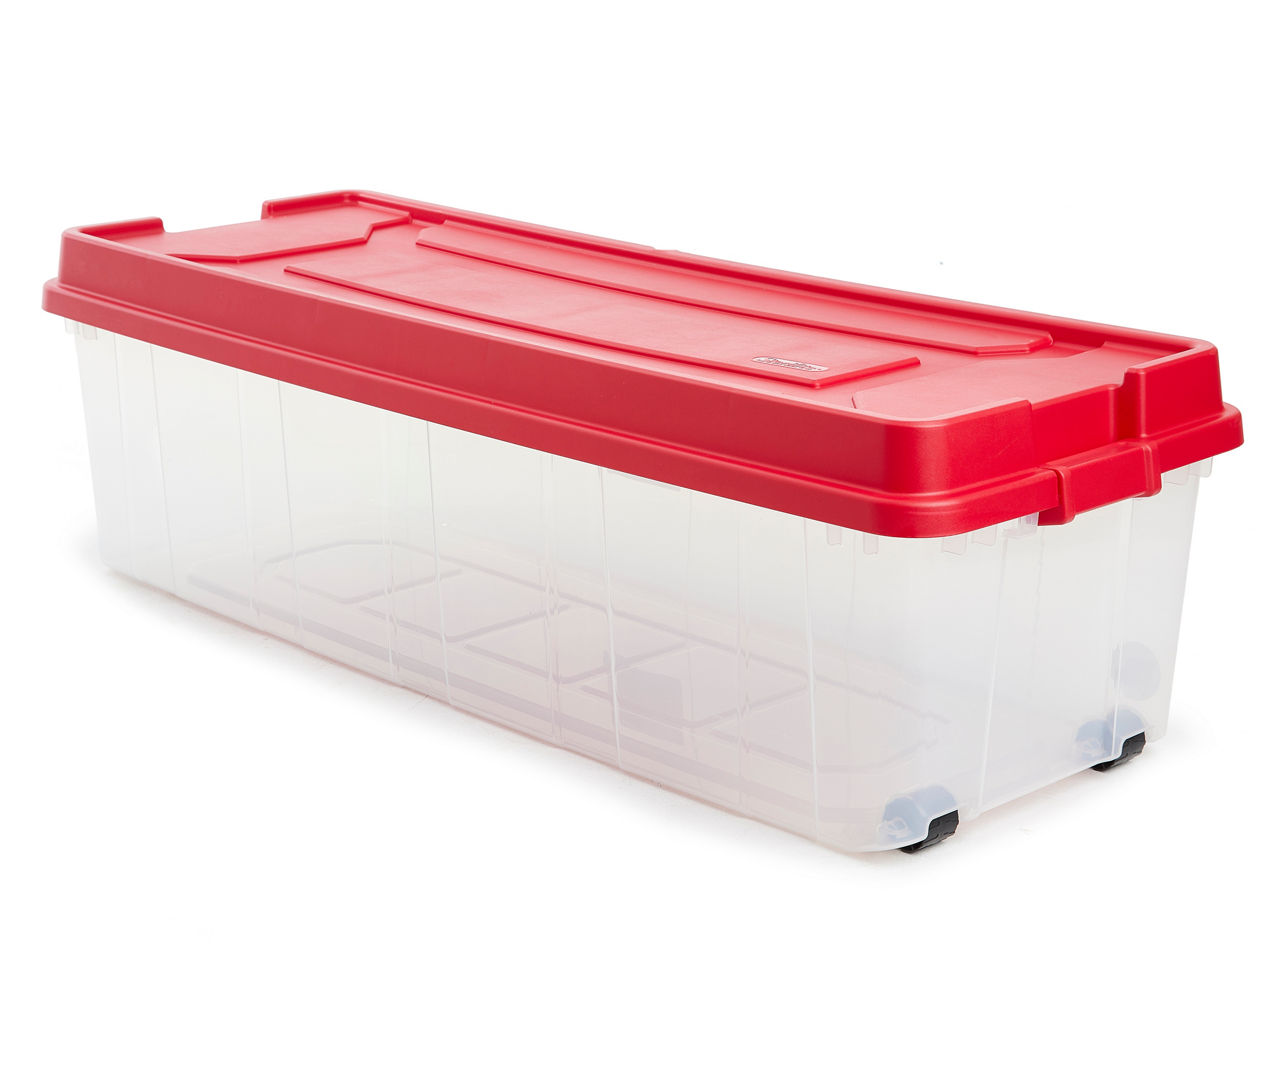 Large Load Capacity Plastic Storage Container with Lid Hard